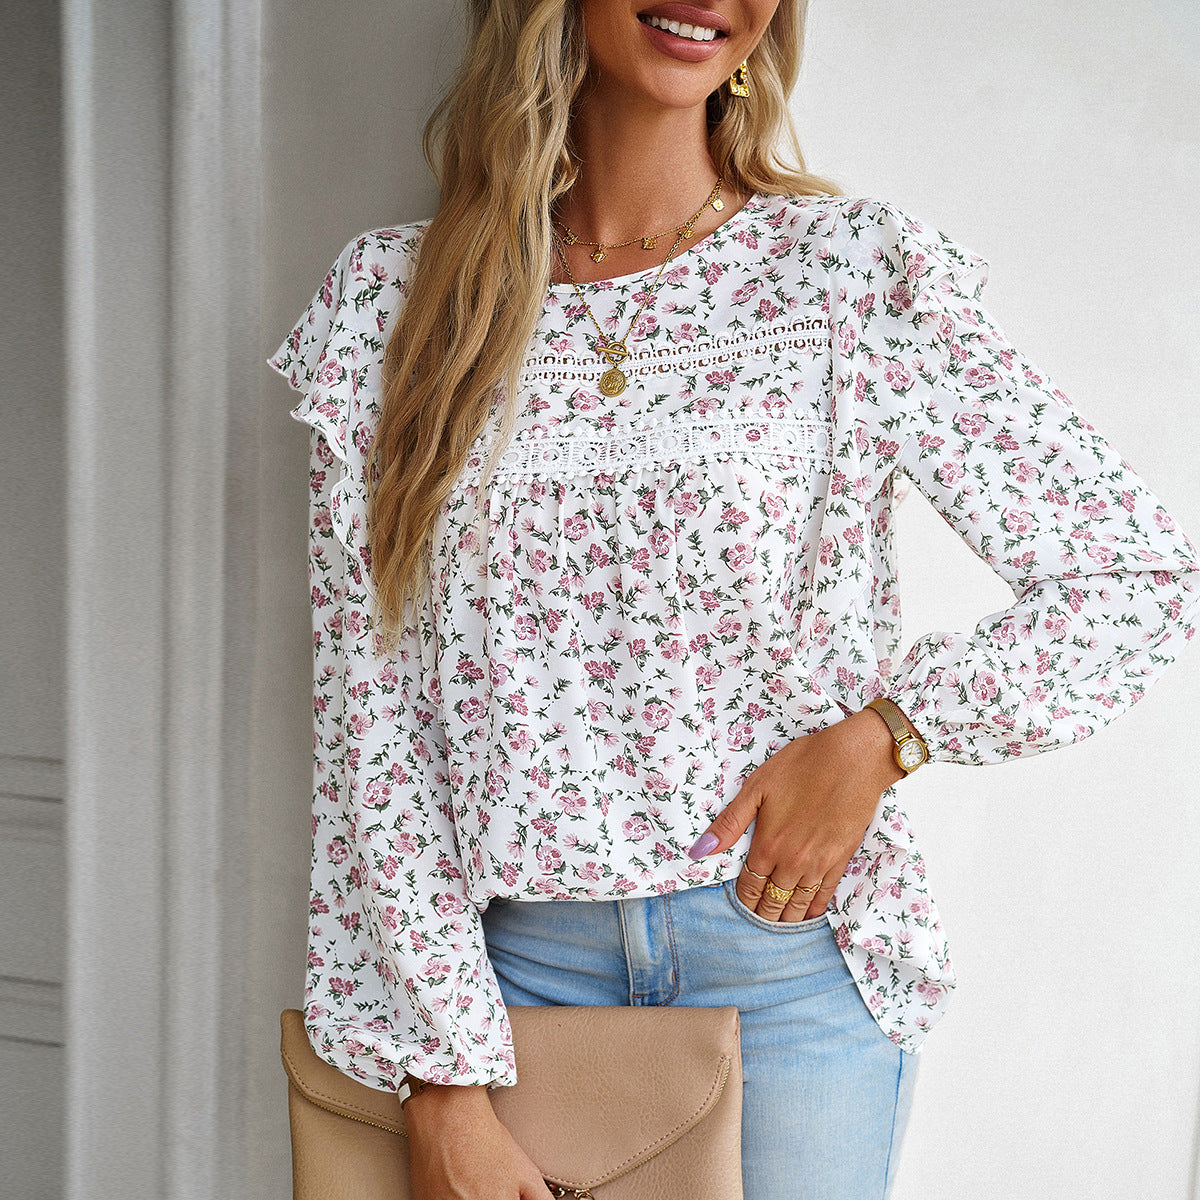 Women's Fashion Round Neck Long Sleeve Floral Shirt